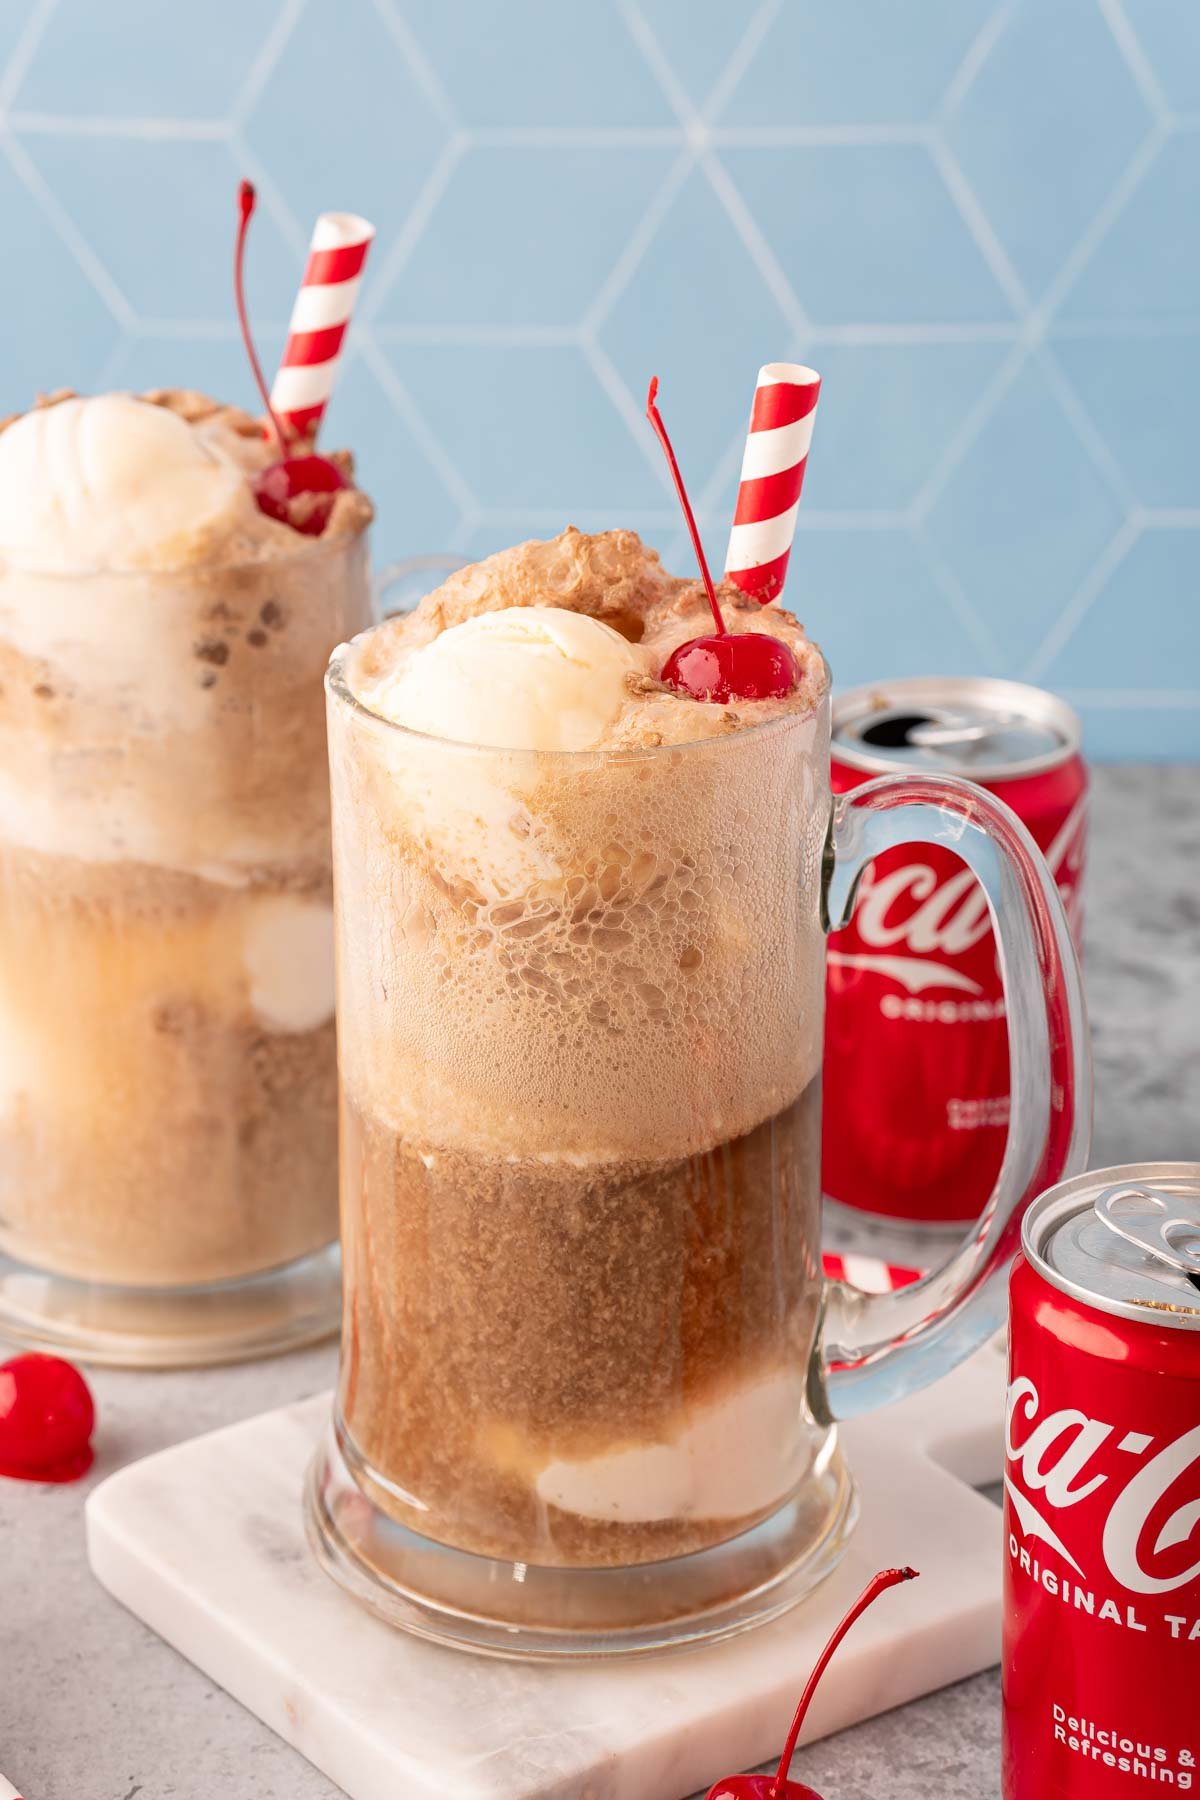 A glass stein filled with a coke float.